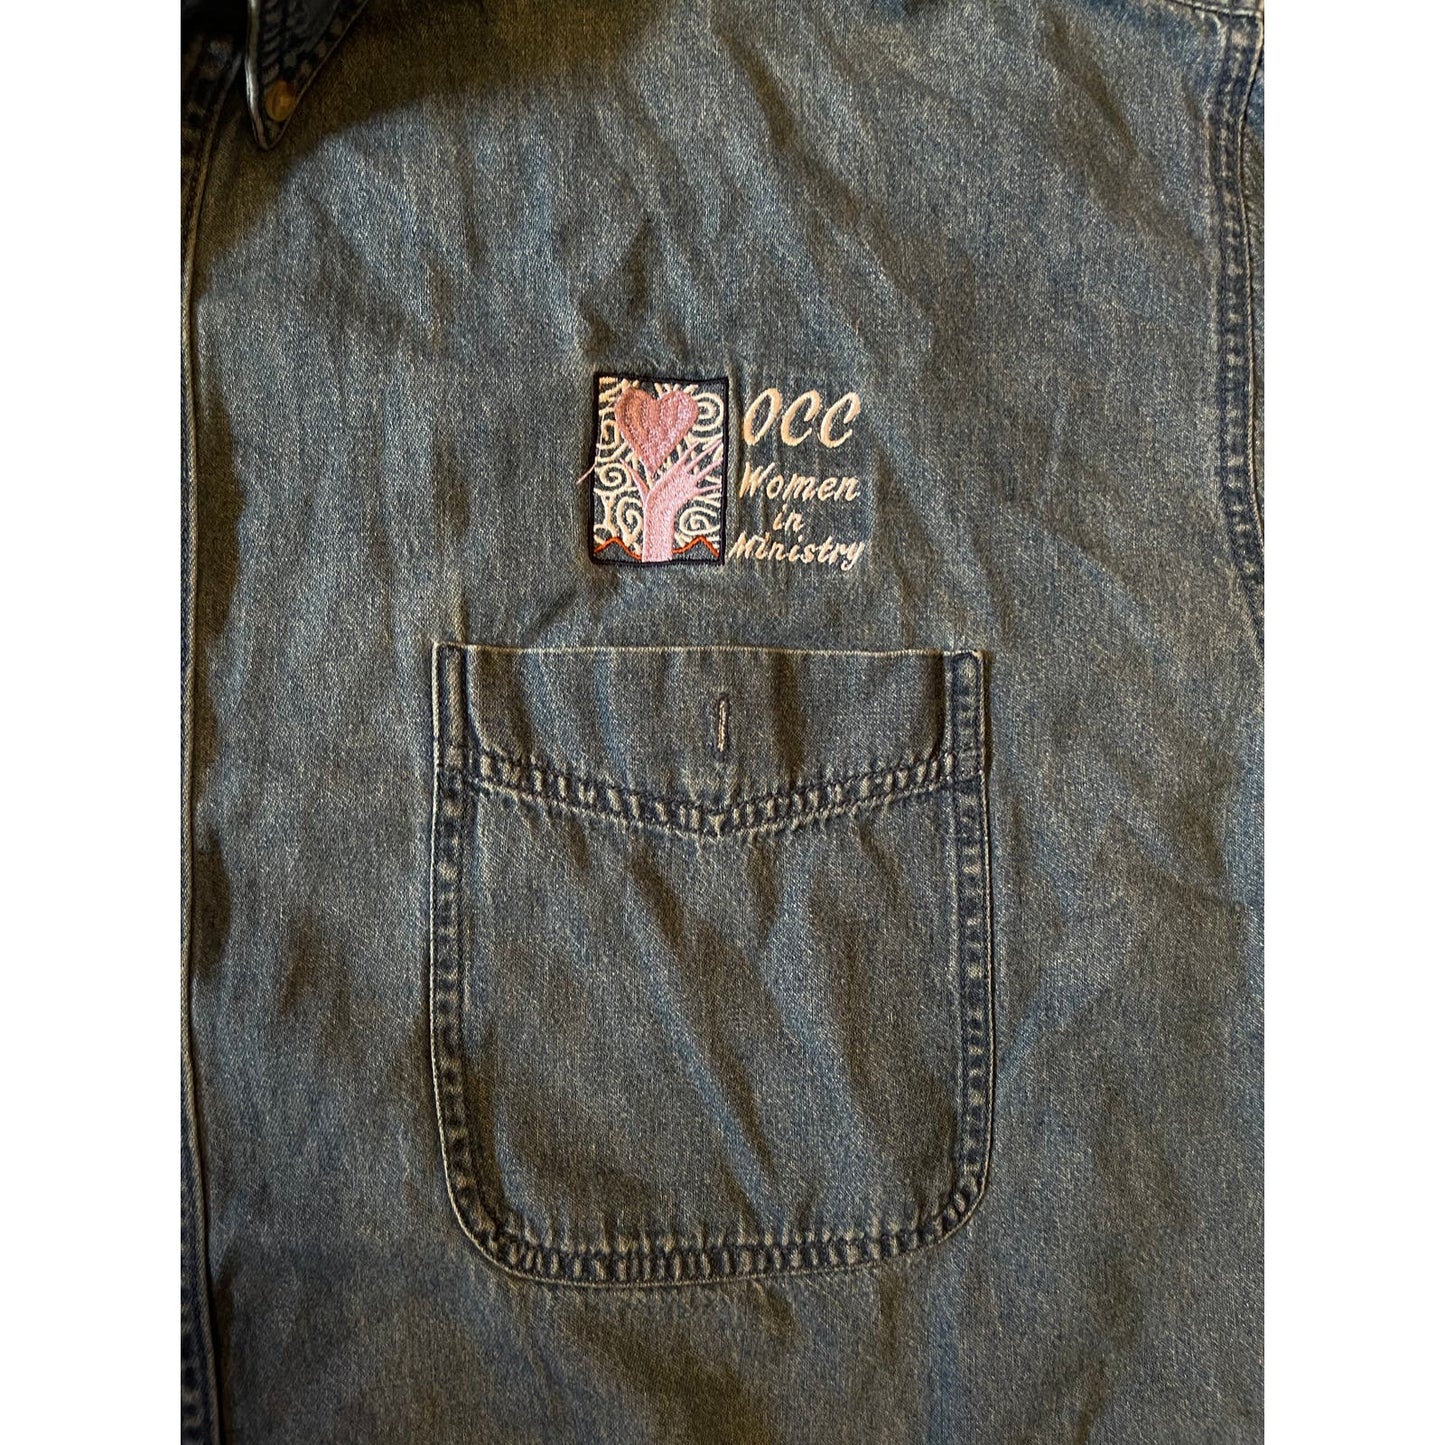 Y2K Women's Wrangler 3XL Cropped Denim Shirt OCC Women in Ministry Embroidered